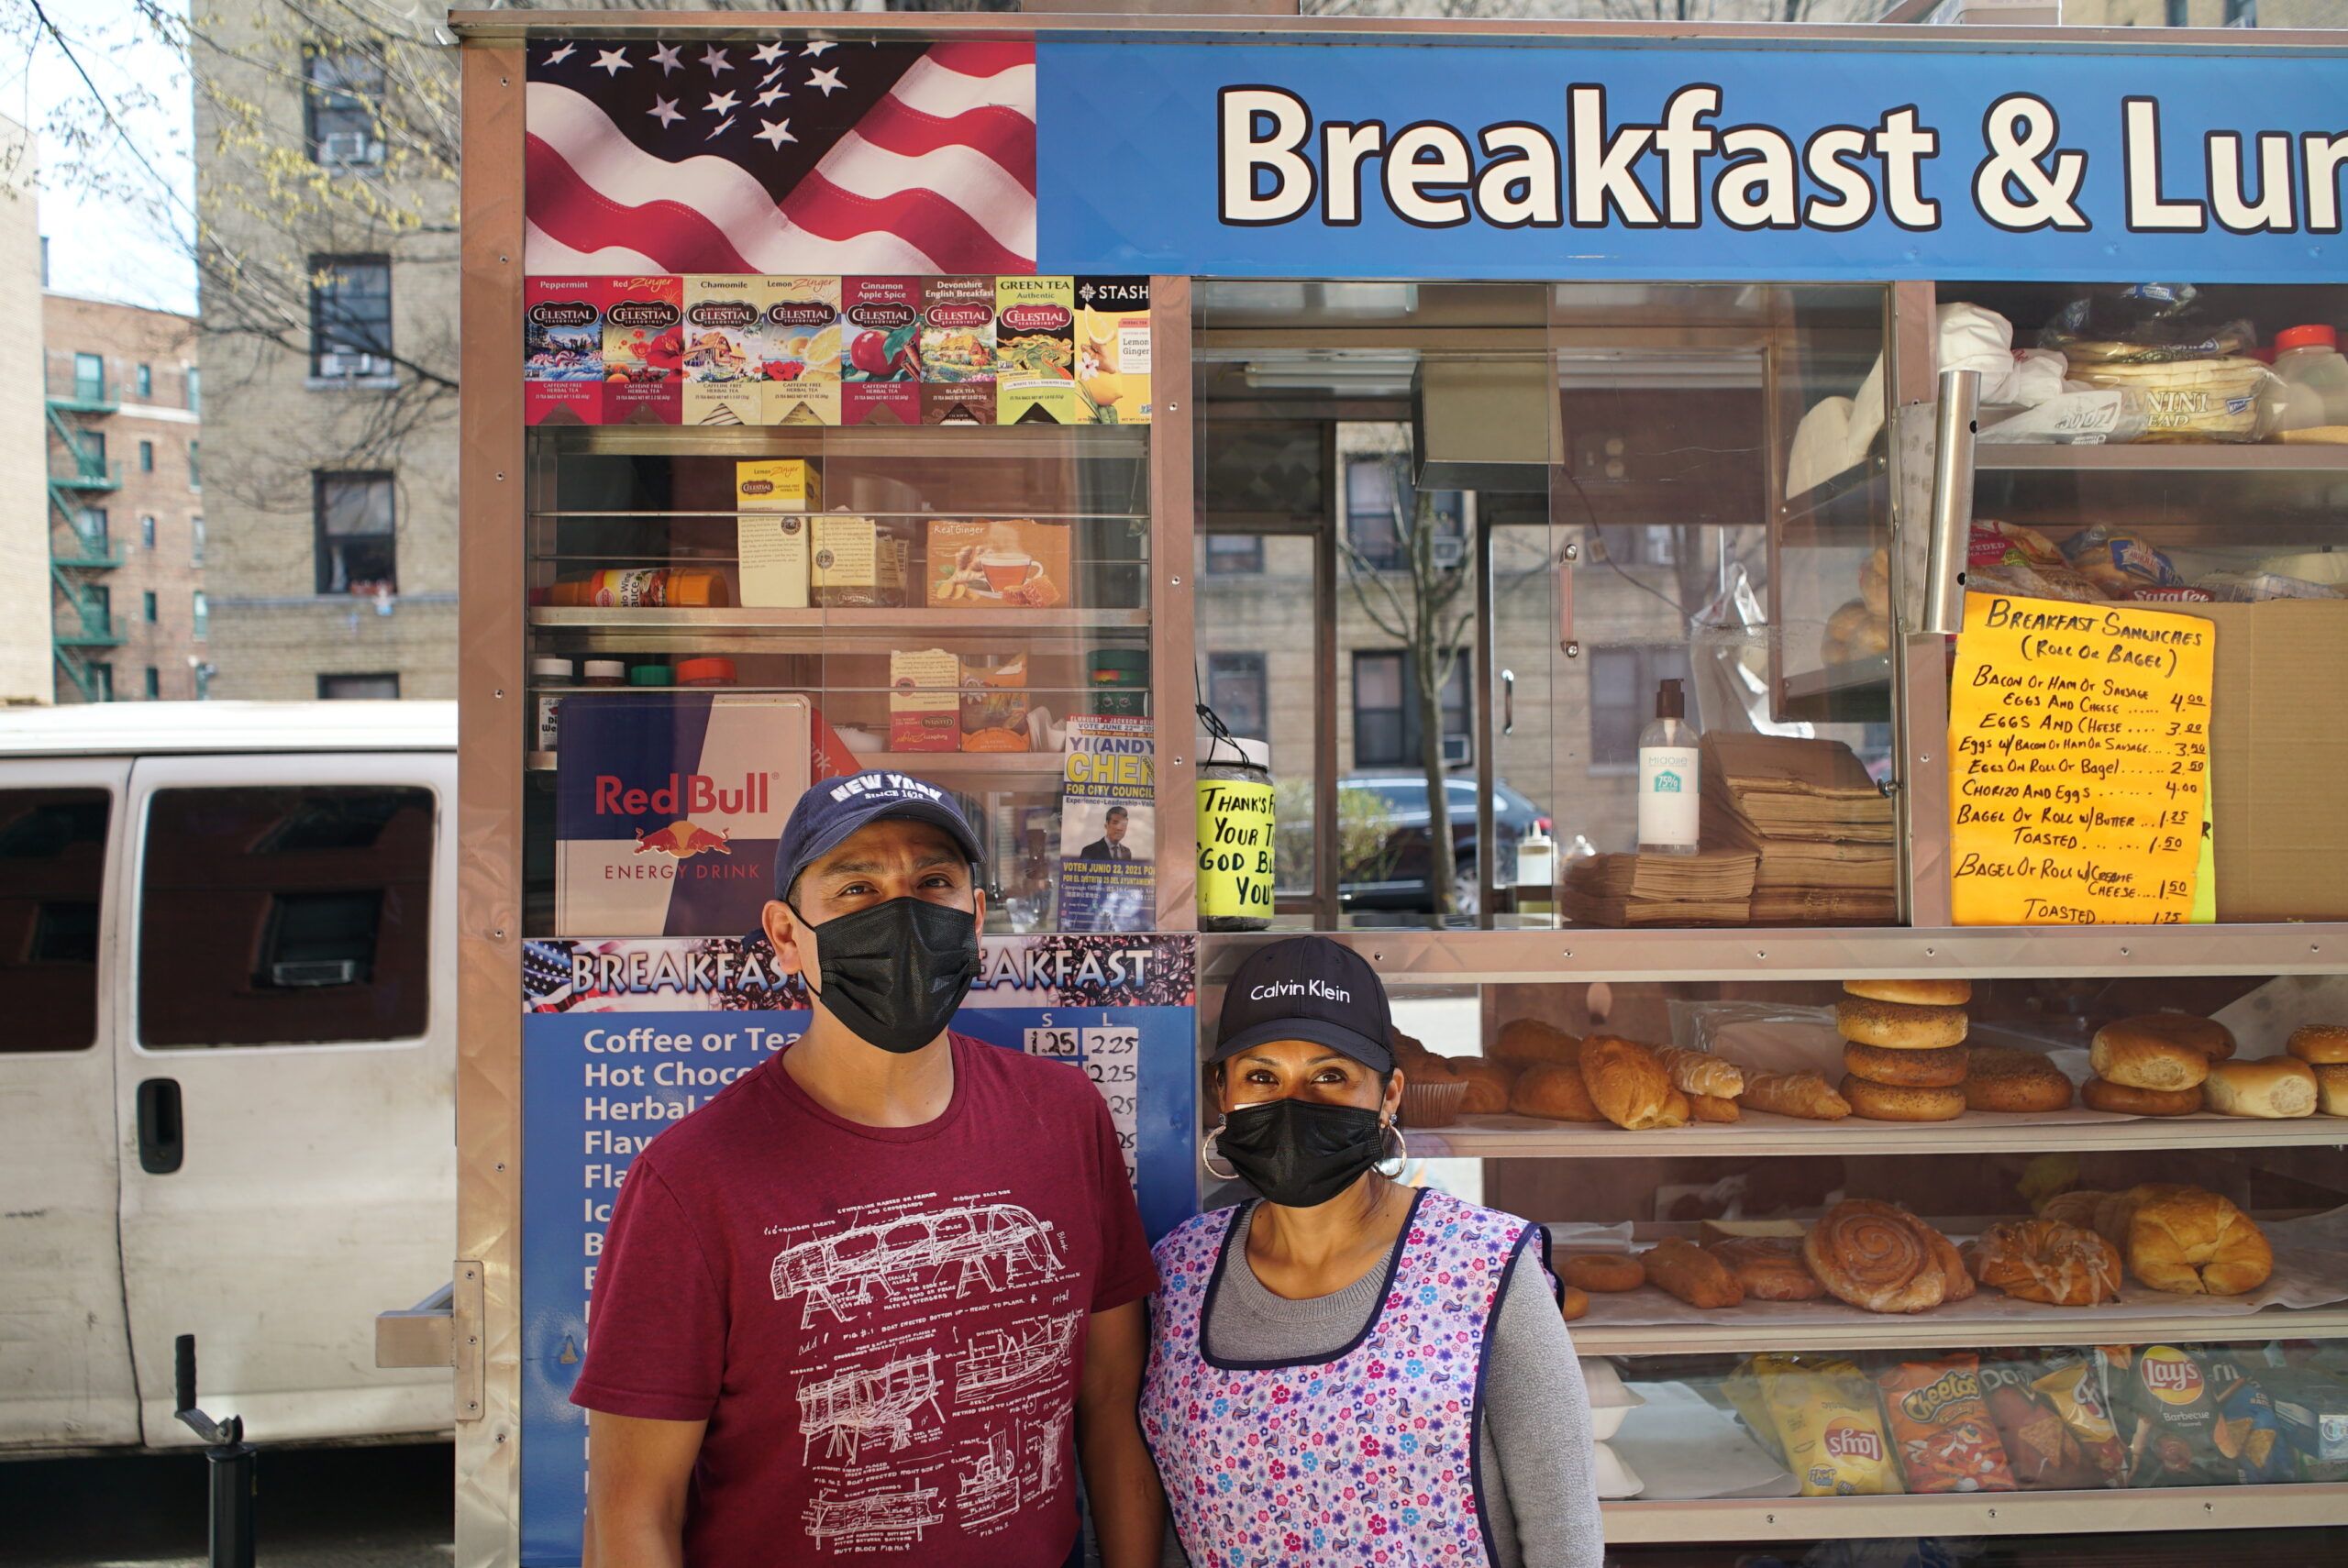 Janet and her husband Miguel are wearing masks and standing in front of their food truck, looking into the camera. Behind the glass display of the food truck there are boxes of tea, danishes, bagels, and chips. There is a menu offering different kinds of breakfast sandwiches.